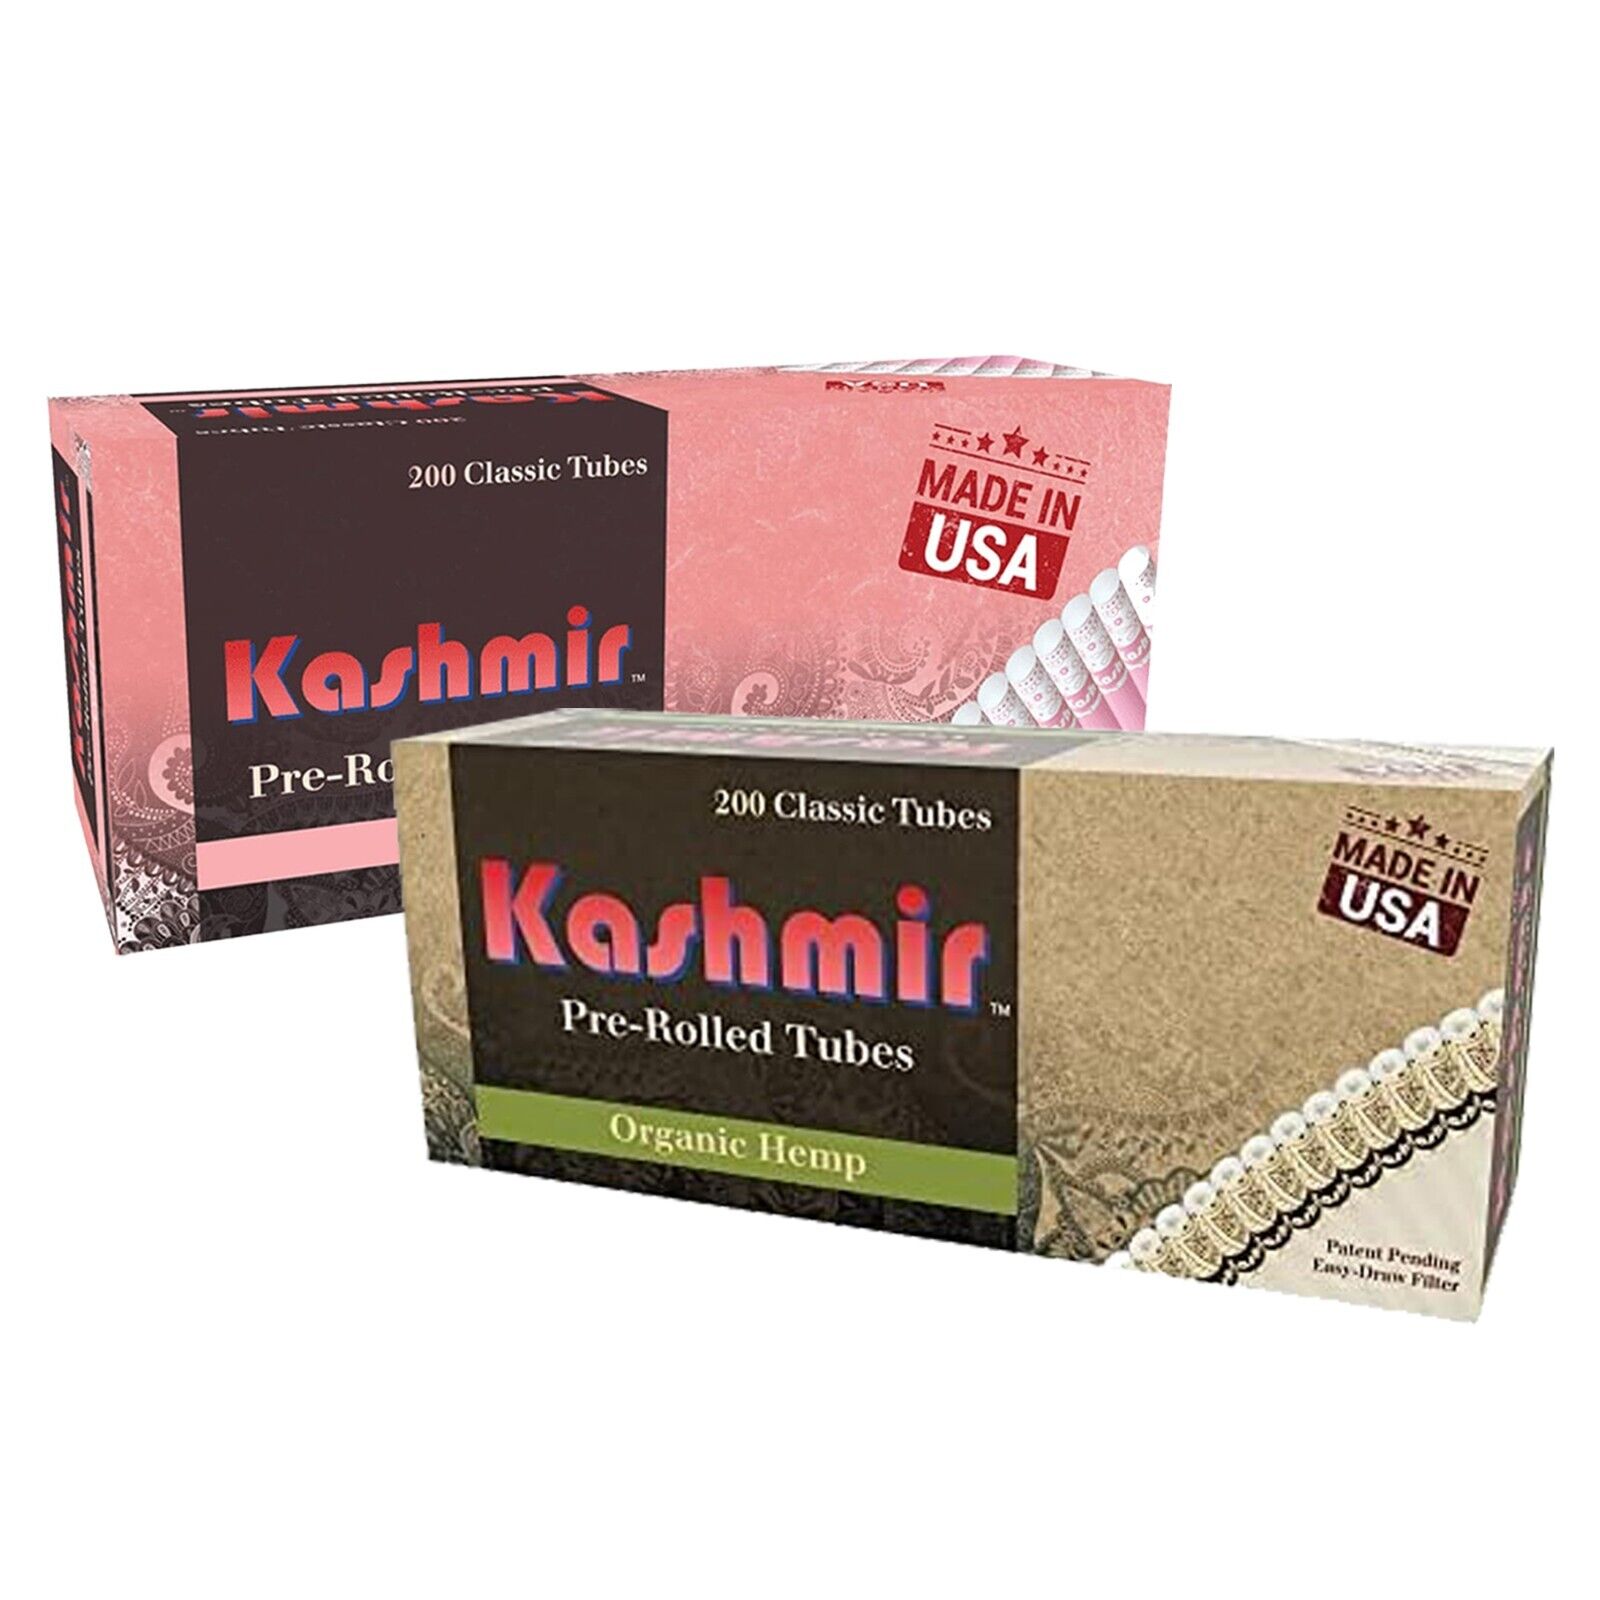 Kashmir Pre-Rolled Tubes Combo of Coral & Organic Cigarette Tubes 200/Pack: 2 Ct